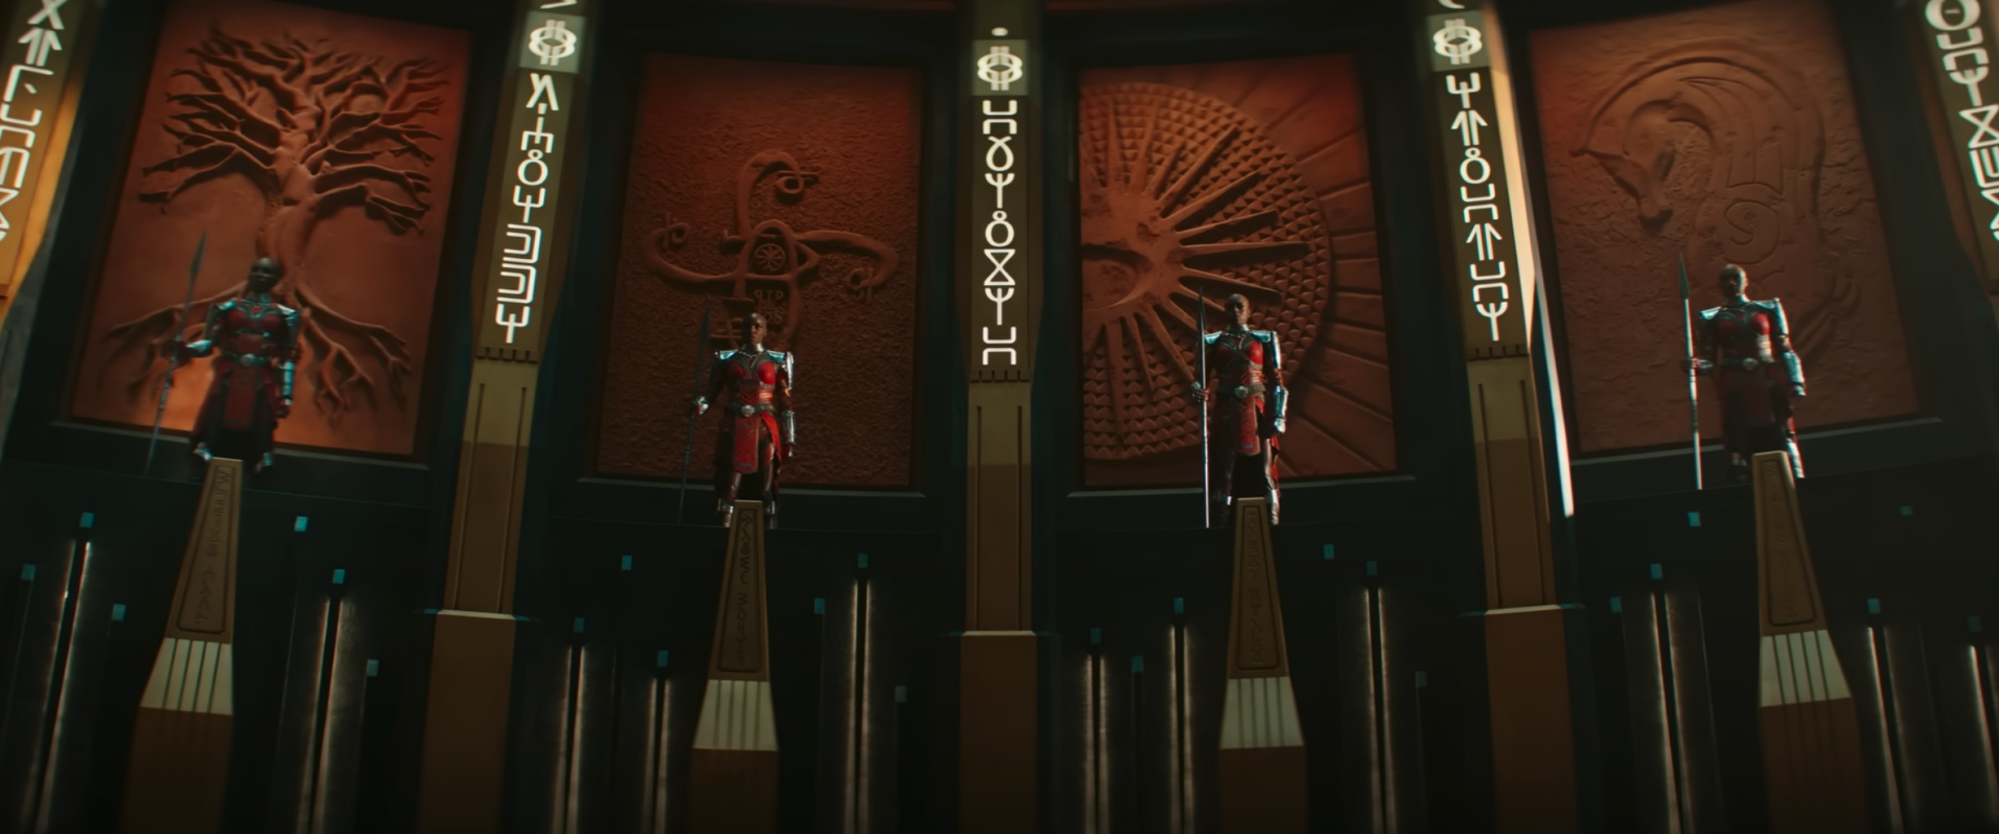 The Dora Milaje, beautifully armored Black women, standing on plinths in an elaborate throne room.